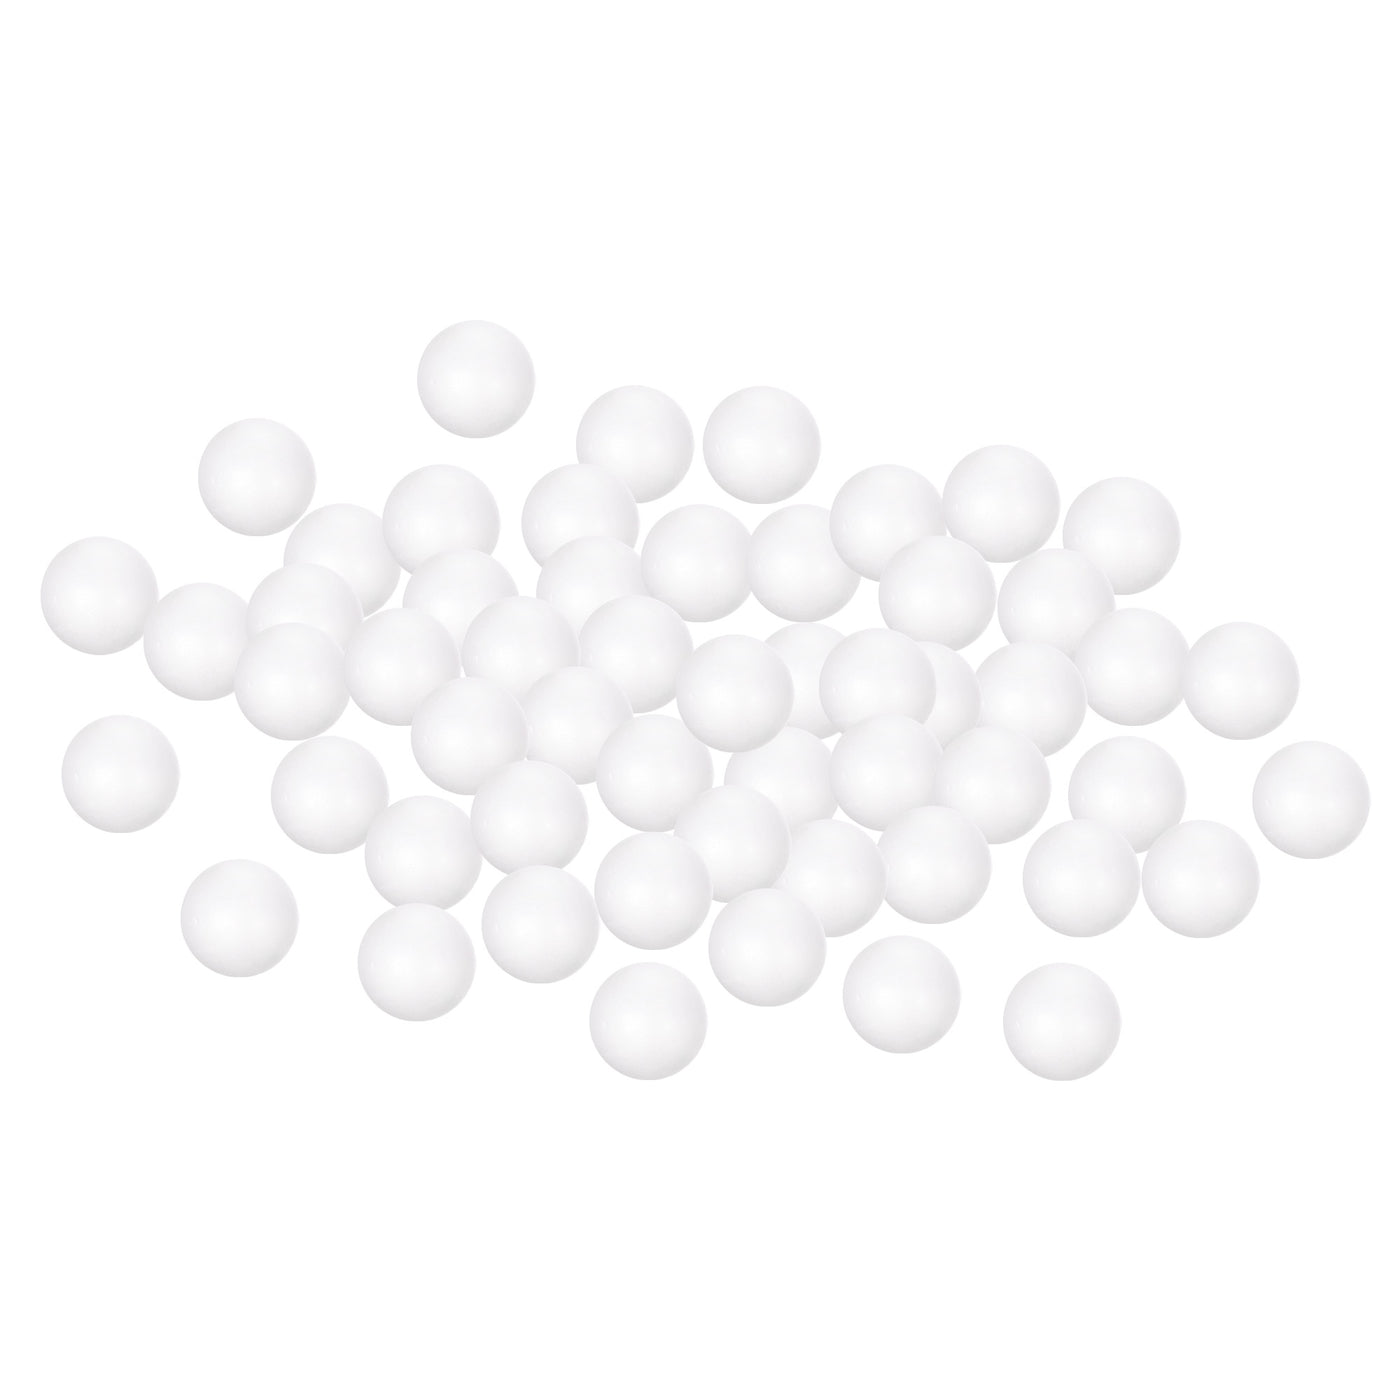 Uxcell Uxcell 100Pcs 1" White Polystyrene Foam Solid Balls for Crafts and Party Decorations